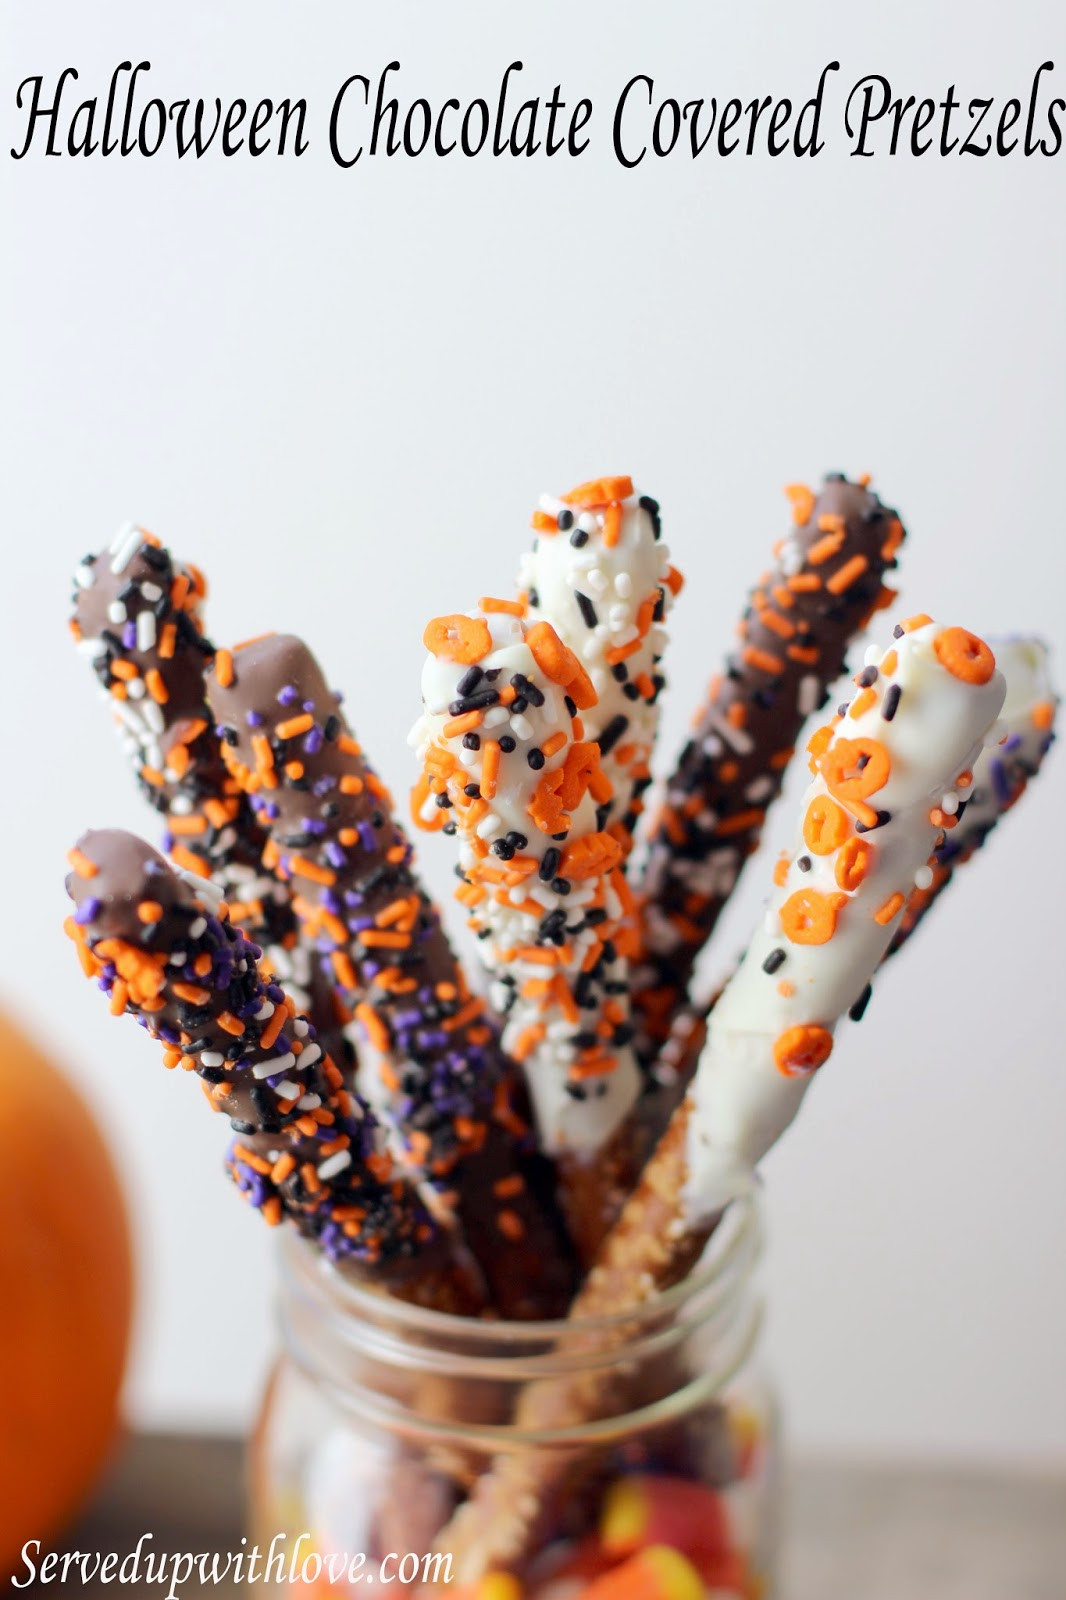 Halloween Chocolate Covered Pretzels
 Served Up With Love Halloween Chocolate Covered Pretzels